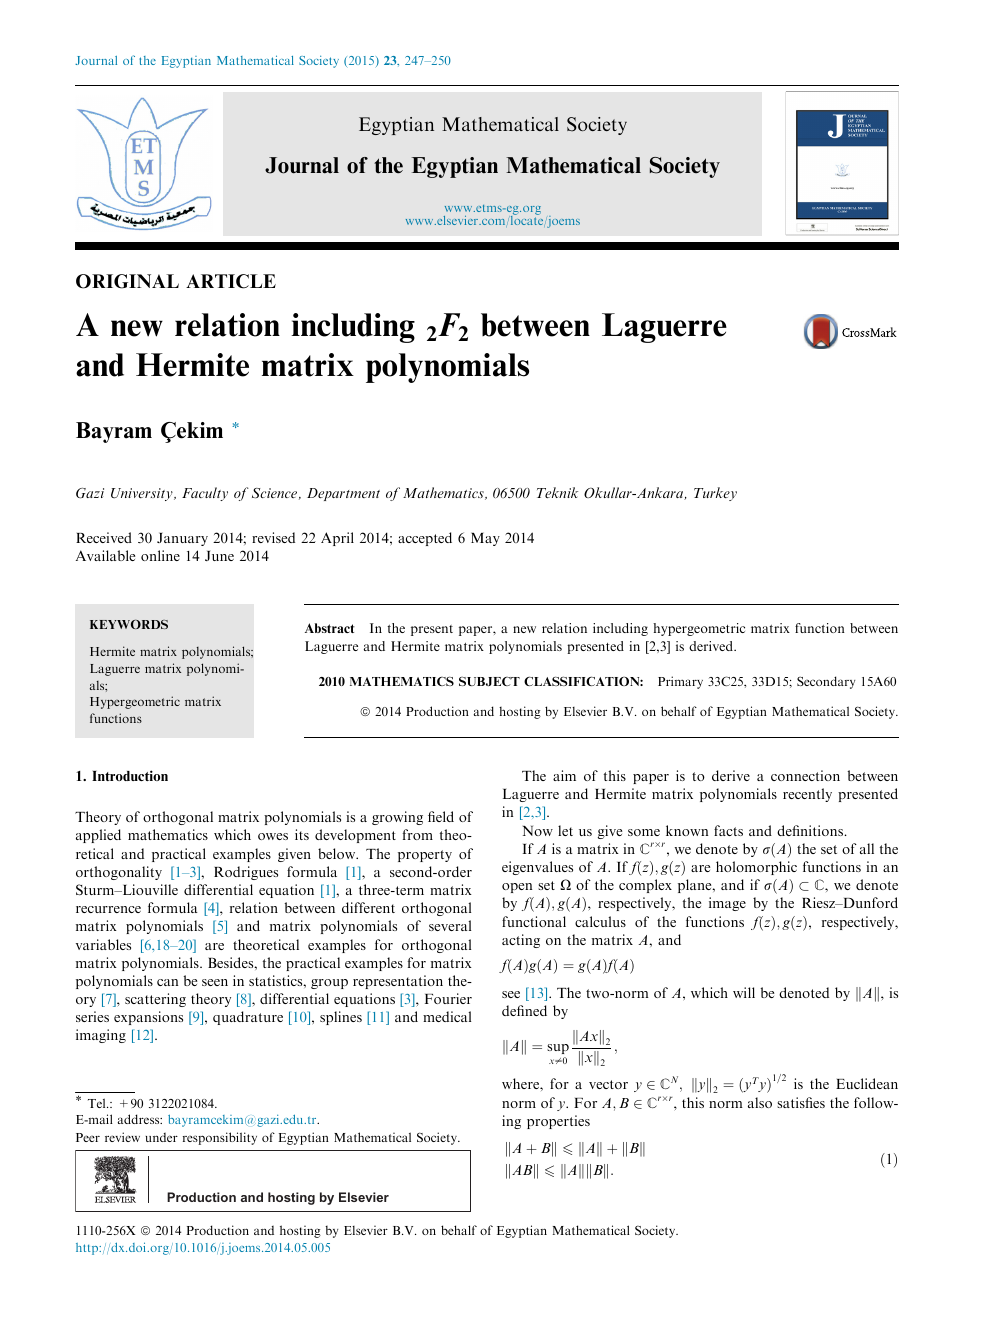 A New Relation Including2f2 Between Laguerre And Hermite Matrix Polynomials Topic Of Research Paper In Physical Sciences Download Scholarly Article Pdf And Read For Free On Cyberleninka Open Science Hub